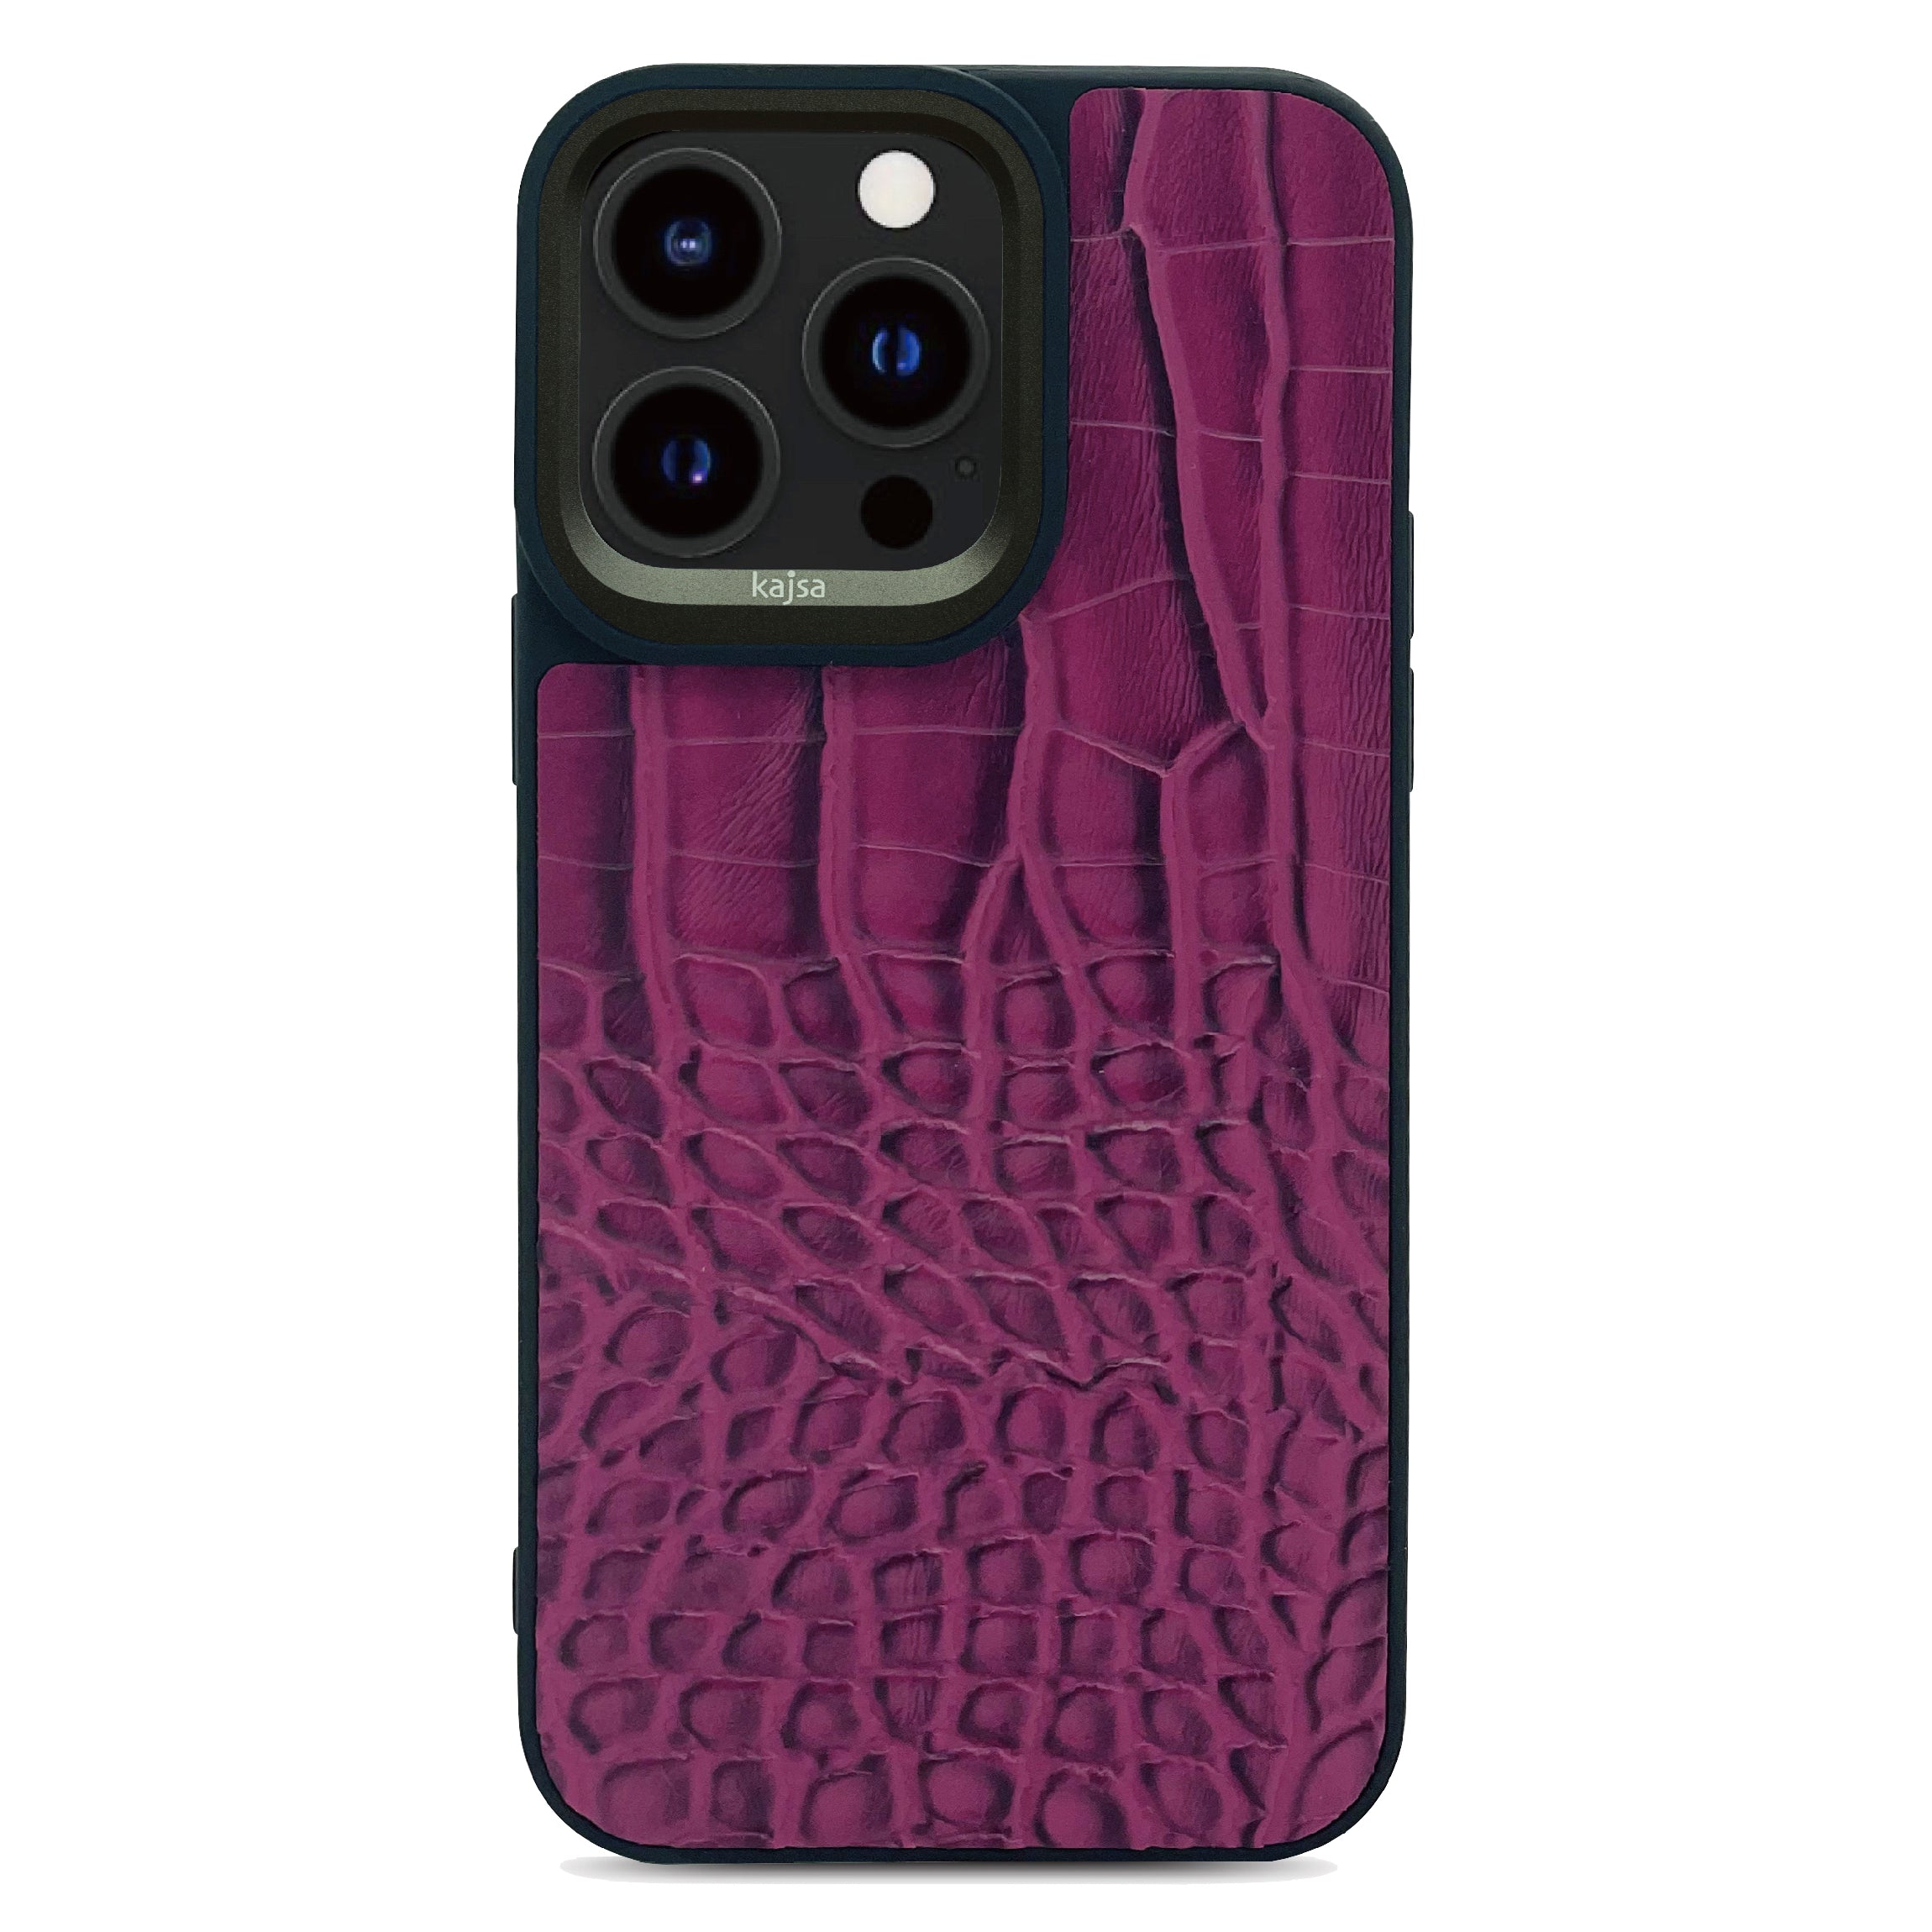 Glamorous Collection - Bright Croco Back Case for iPhone 14-Phone Case- phone case - phone cases- phone cover- iphone cover- iphone case- iphone cases- leather case- leather cases- DIYCASE - custom case - leather cover - hand strap case - croco pattern case - snake pattern case - carbon fiber phone case - phone case brand - unique phone case - high quality - phone case brand - protective case - buy phone case hong kong - online buy phone case - iphone‎手機殼 - 客製化手機殼 - samsung ‎手機殼 - 香港手機殼 - 買電話殼